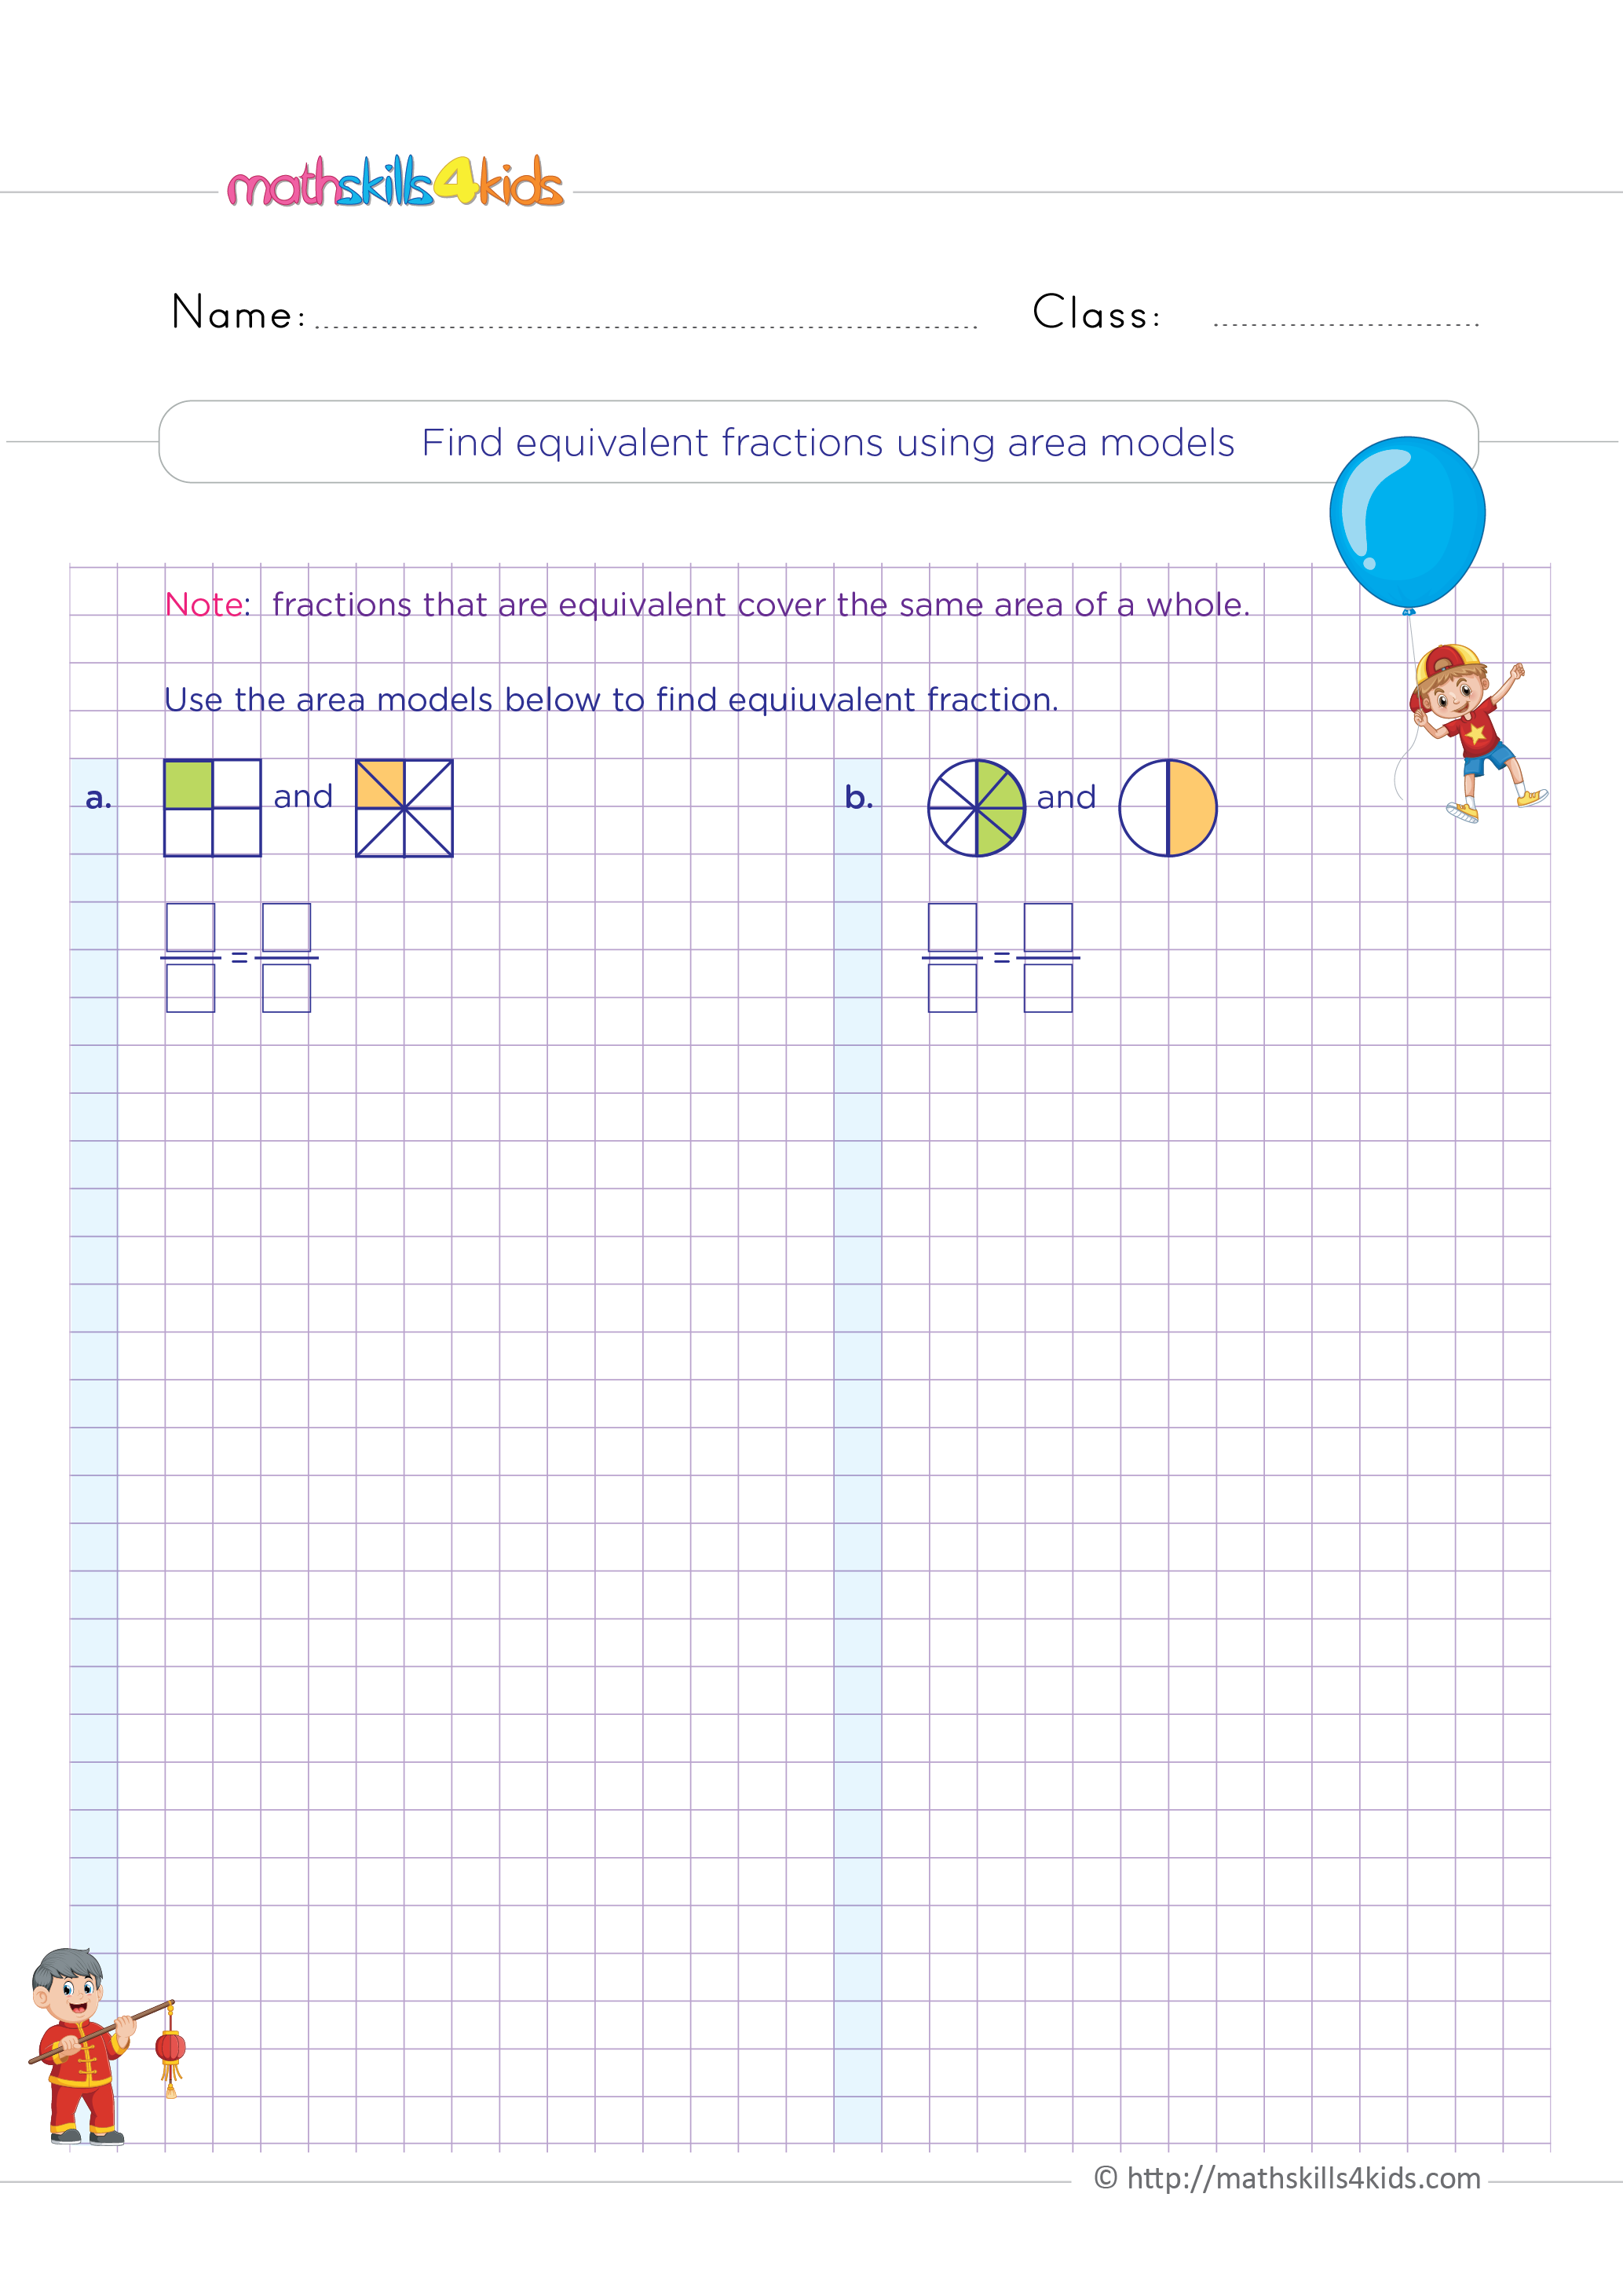 4th Grade math equivalent fractions worksheets: Free download - Finding equivalent fractions using area models